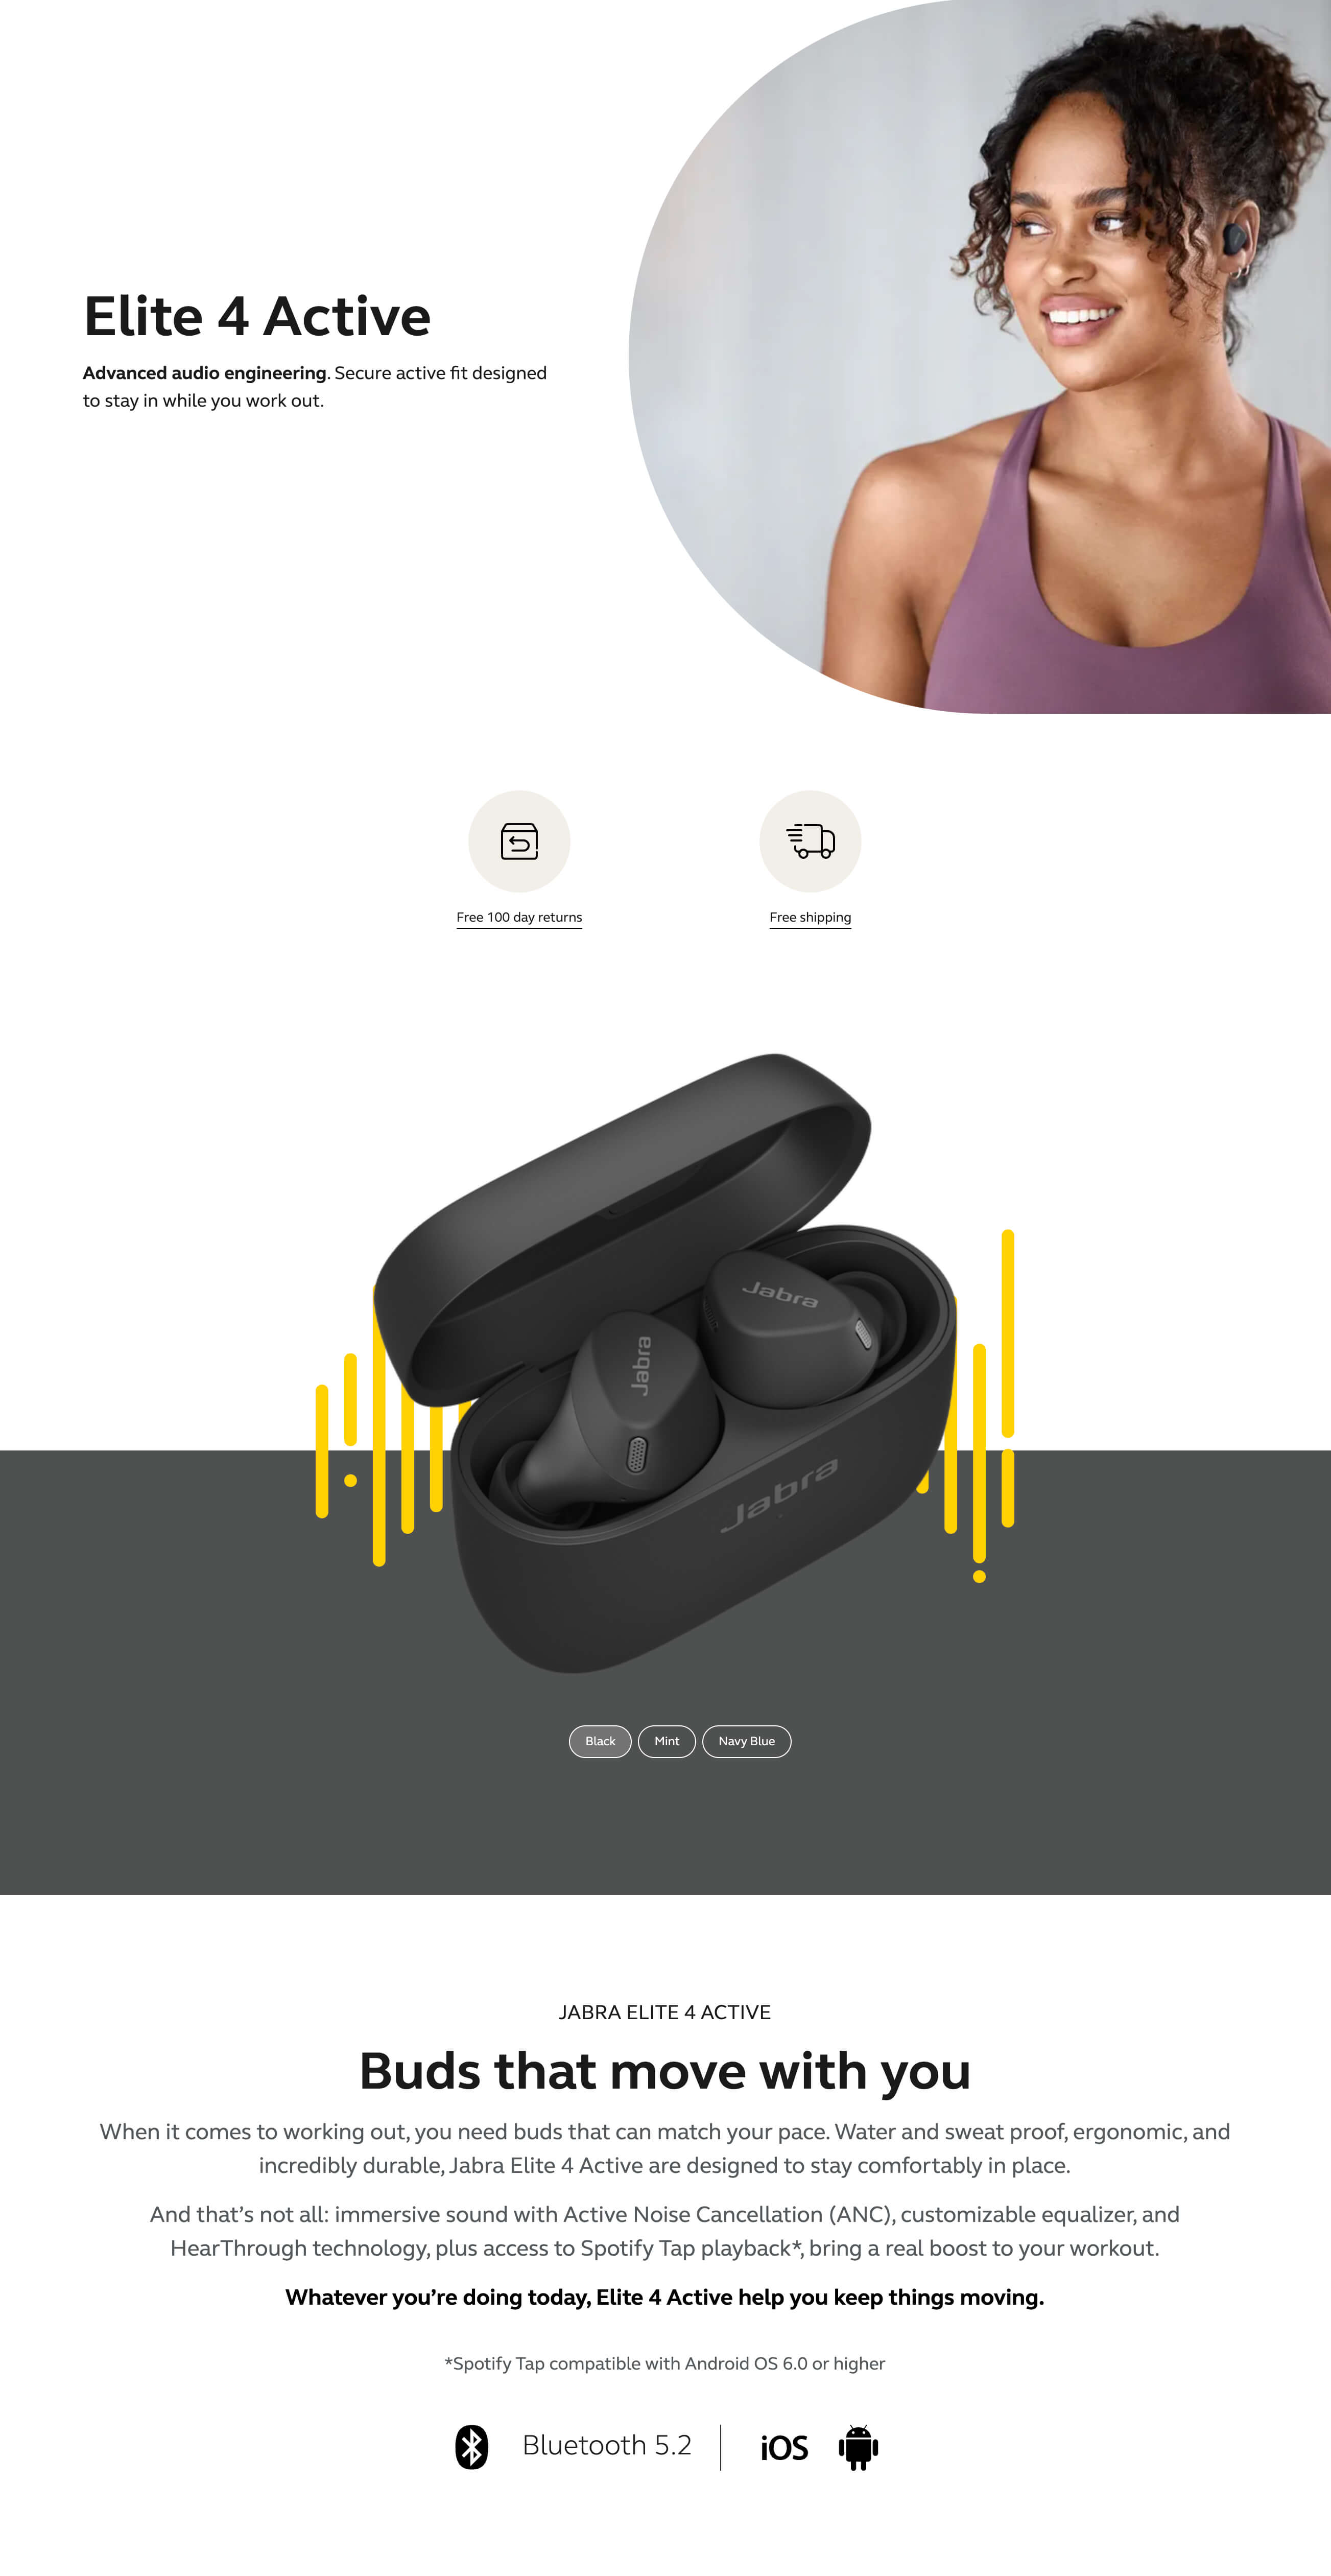  Jabra Elite 4 Active in-Ear Bluetooth Earbuds – True Wireless  Earbuds with Secure Active Fit, 4 Built-in Microphones, Active Noise  Cancellation and Adjustable HearThrough Technology – Mint : Electronics